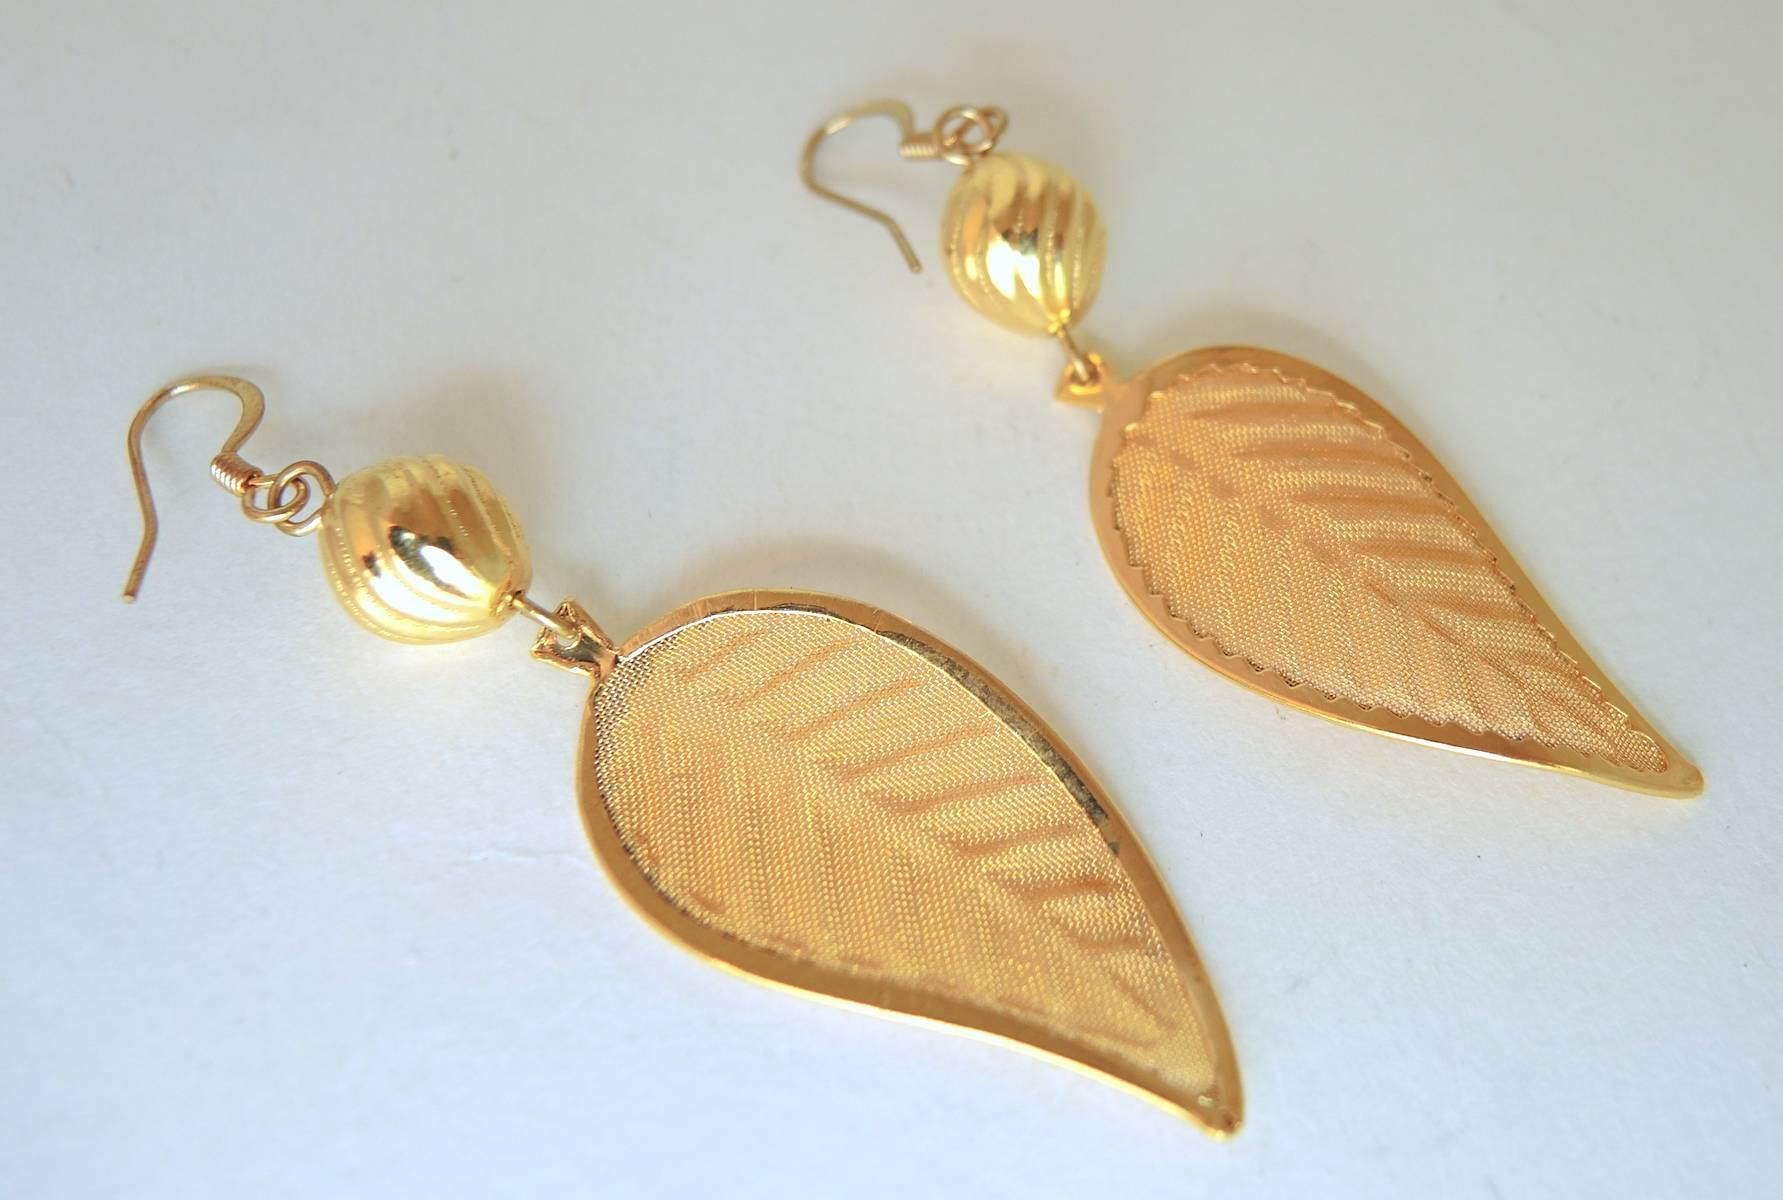 These very feminine earrings feature a leaf design in a gold-tone mesh setting.  They are pierced earrings and measure 2-1/2” x 3/4”.  These earrings are in excellent condition.